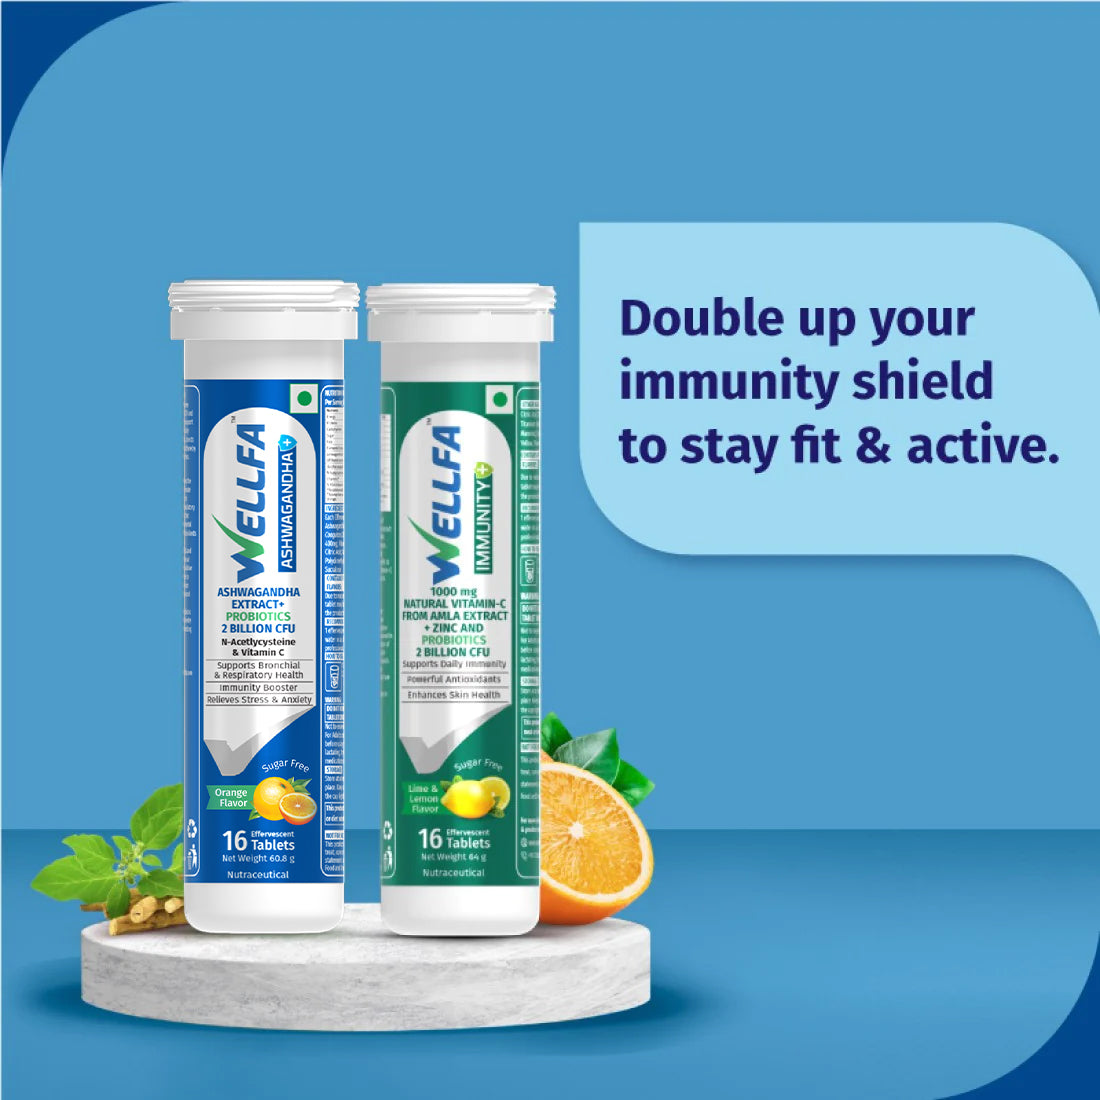 Double up your immunity shield to stay fit and active